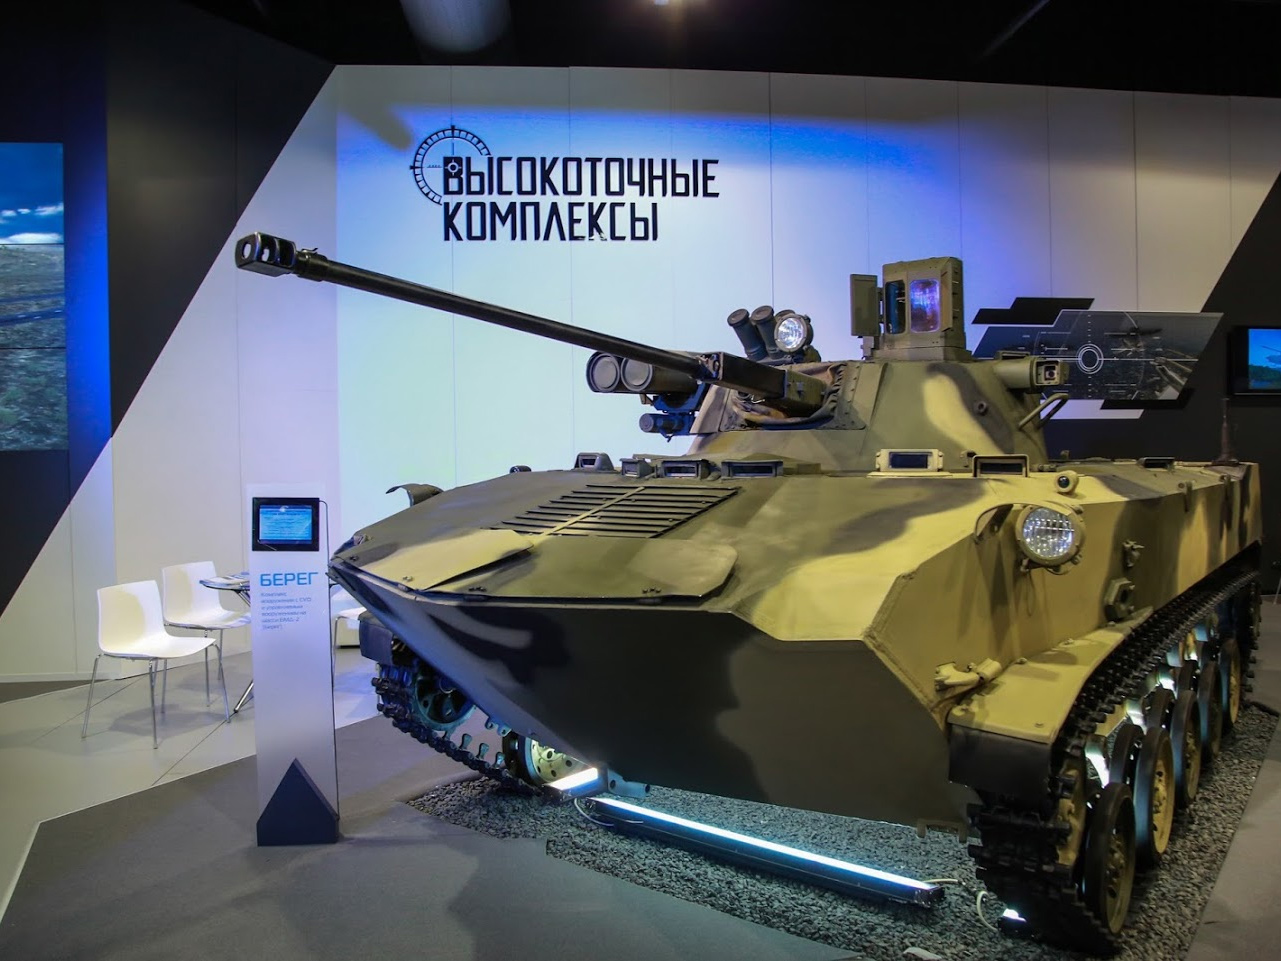 Rostec's subsidiaries has made it to the Top100 arms manufacturers